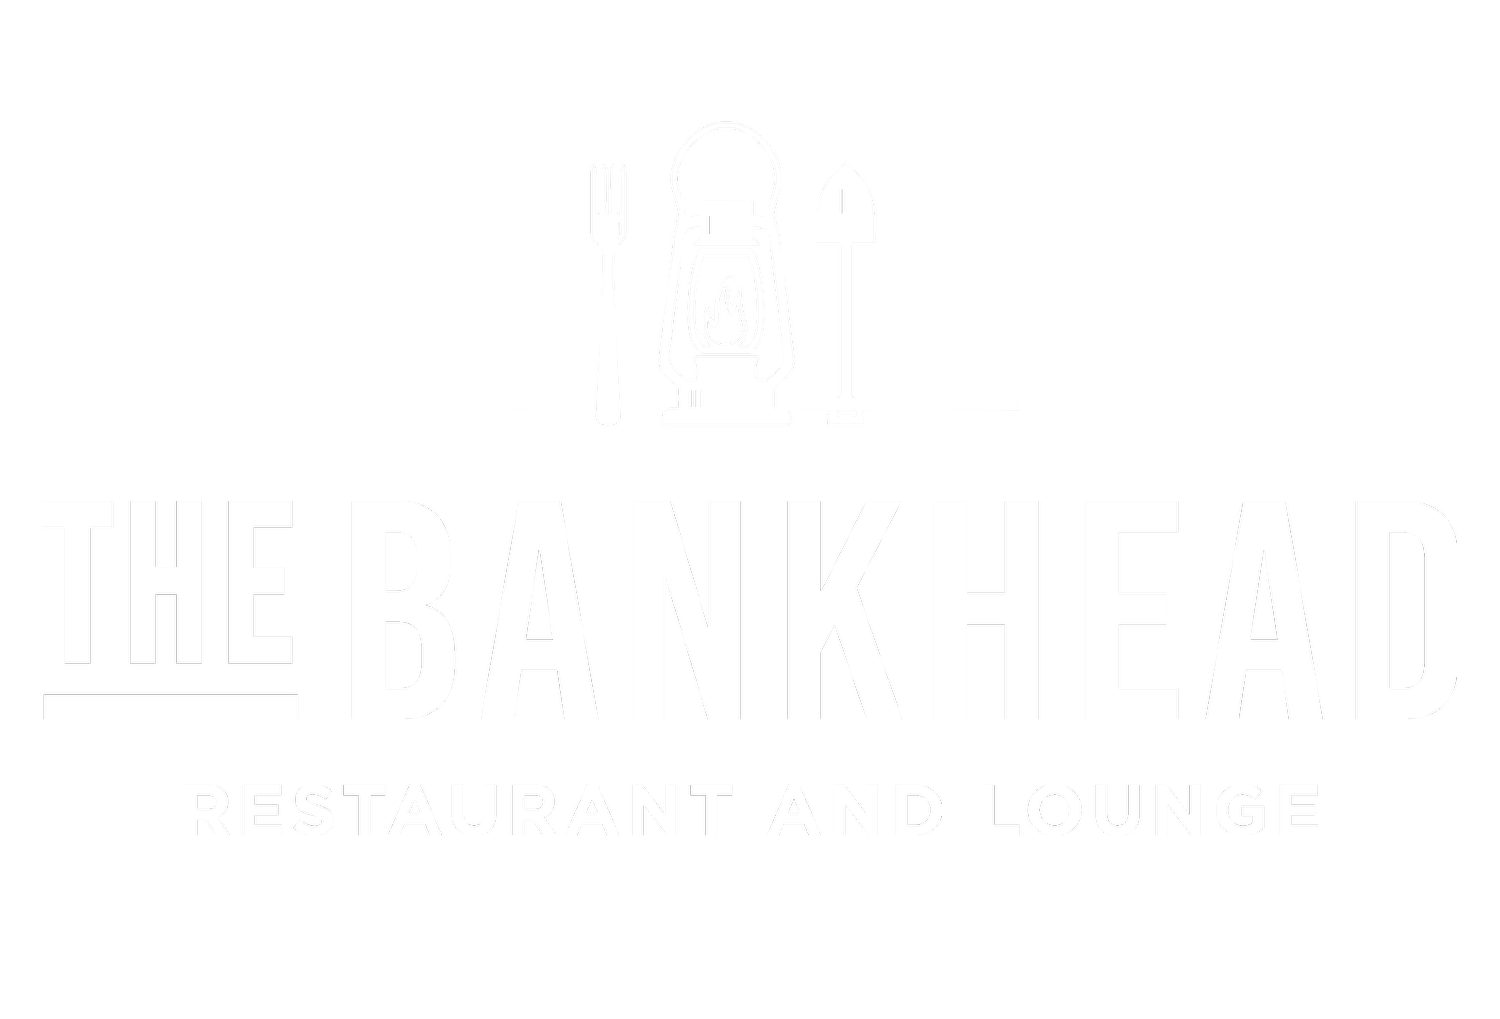 The Bankhead Restaurant and Lounge